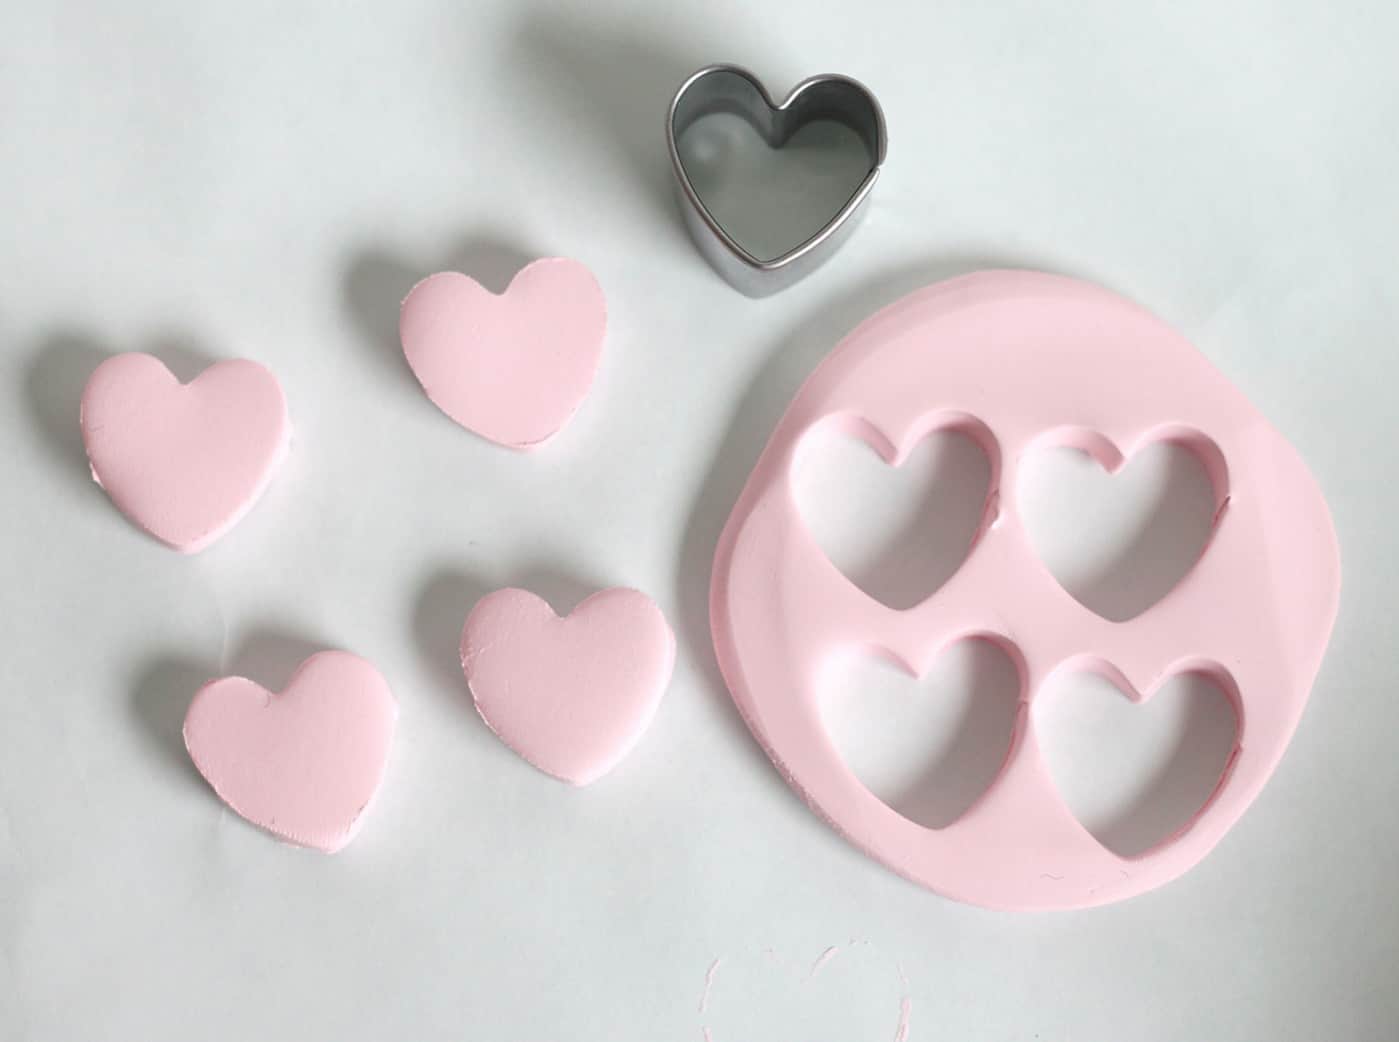 Cutting hearts out of pink polymer clay with a heart cookie cutter